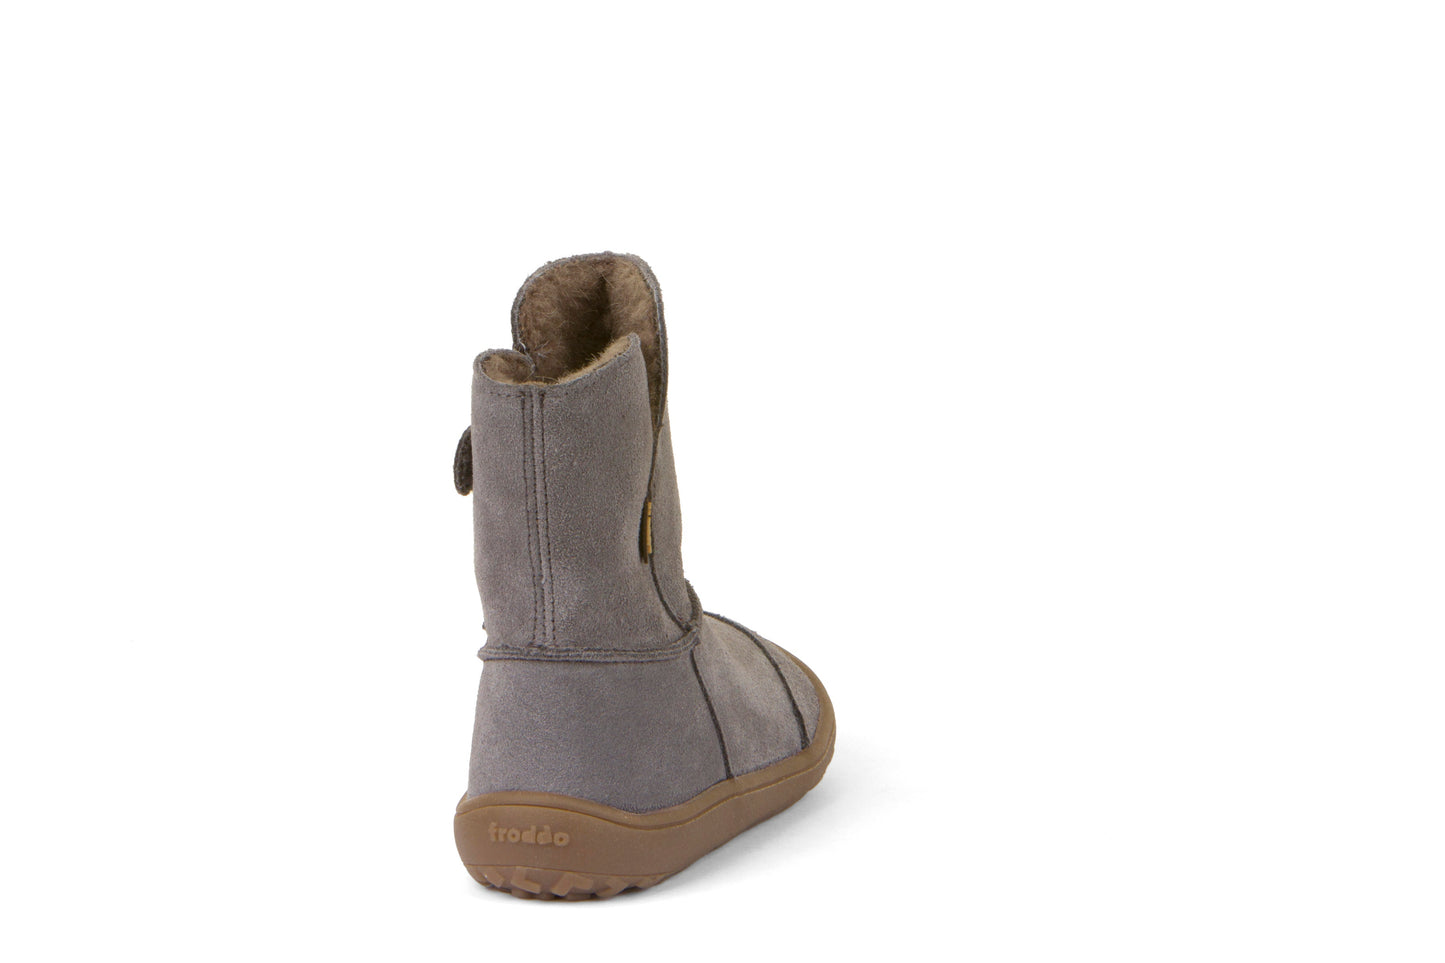 Froddo Barefoot - Botines Tex-Suede - Gris - Adulto-Froddo-Cacles Barefoot